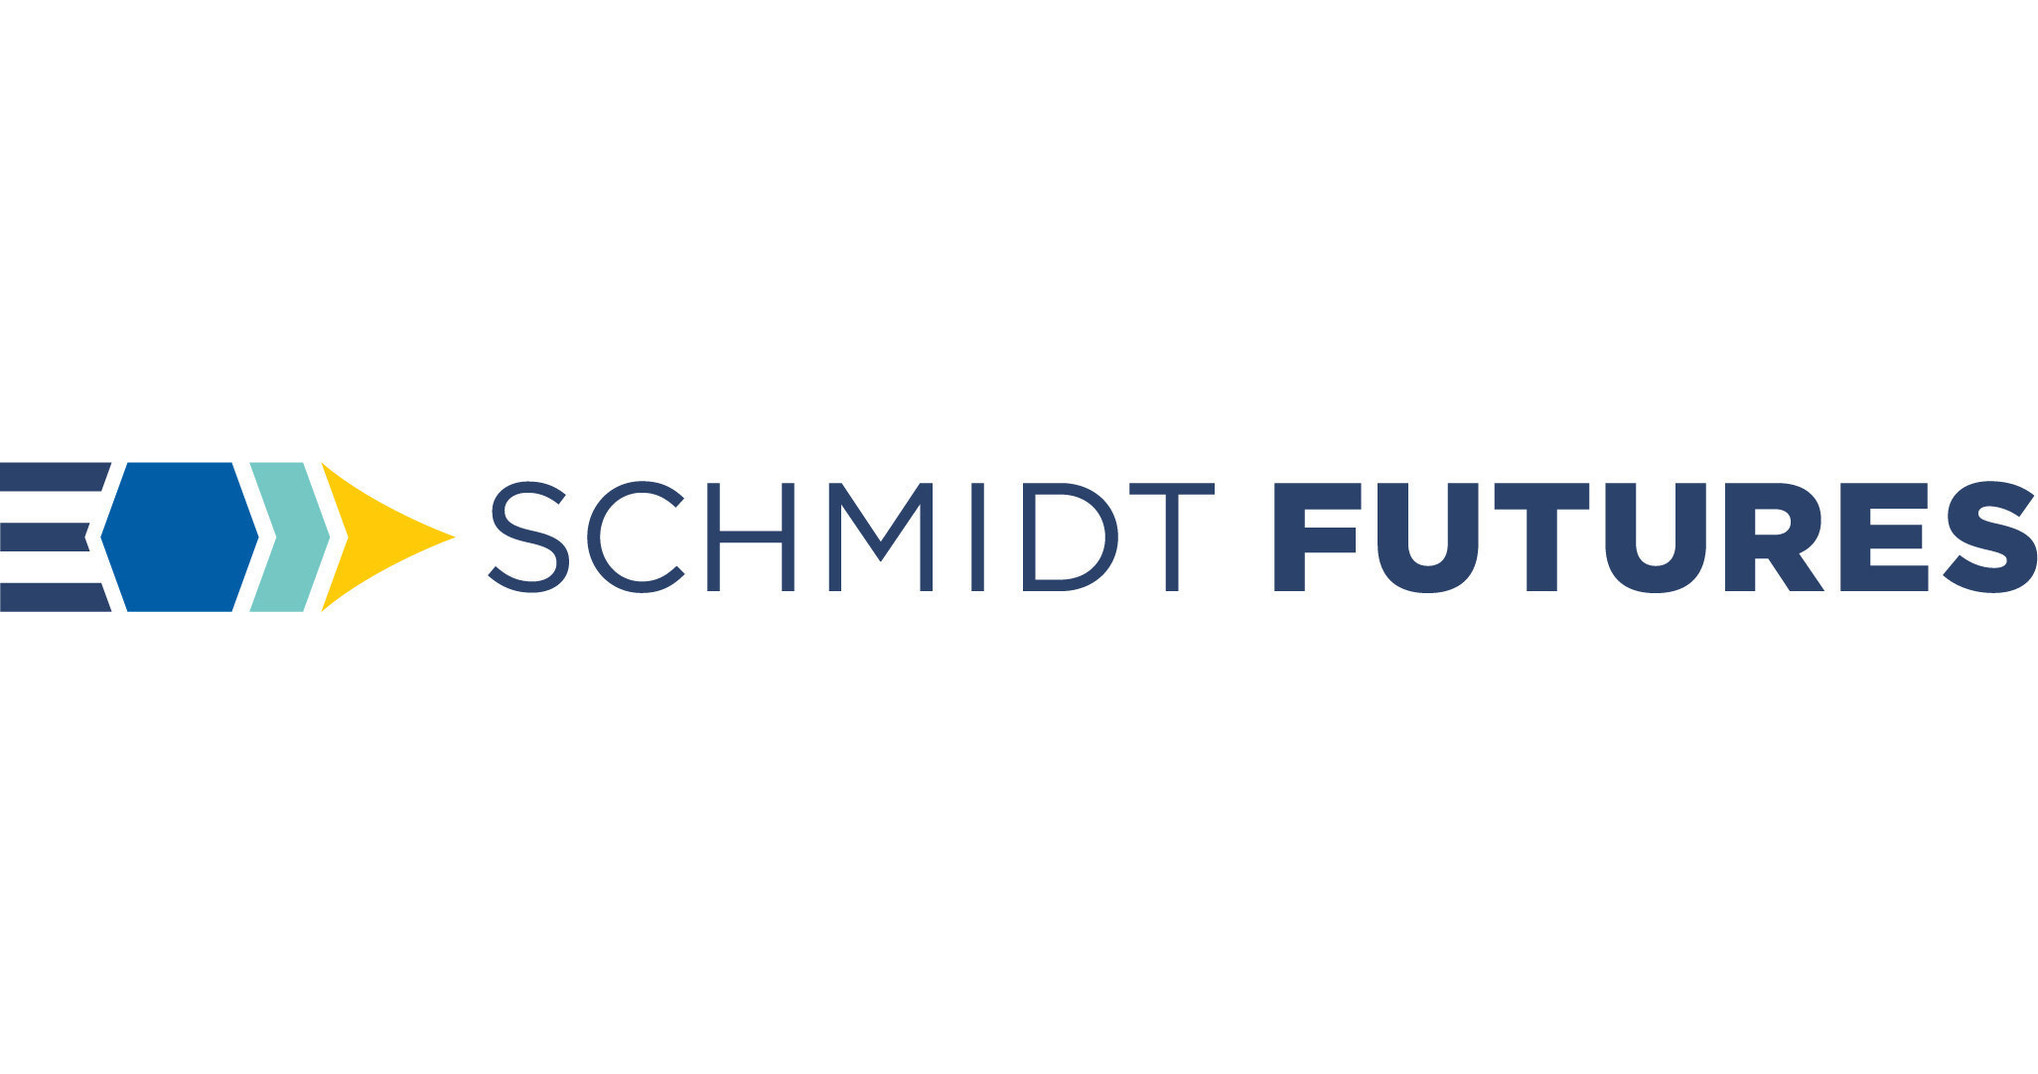 Schmidt Futures, a philanthropic initiative founded by Eric and Wendy Schmidt